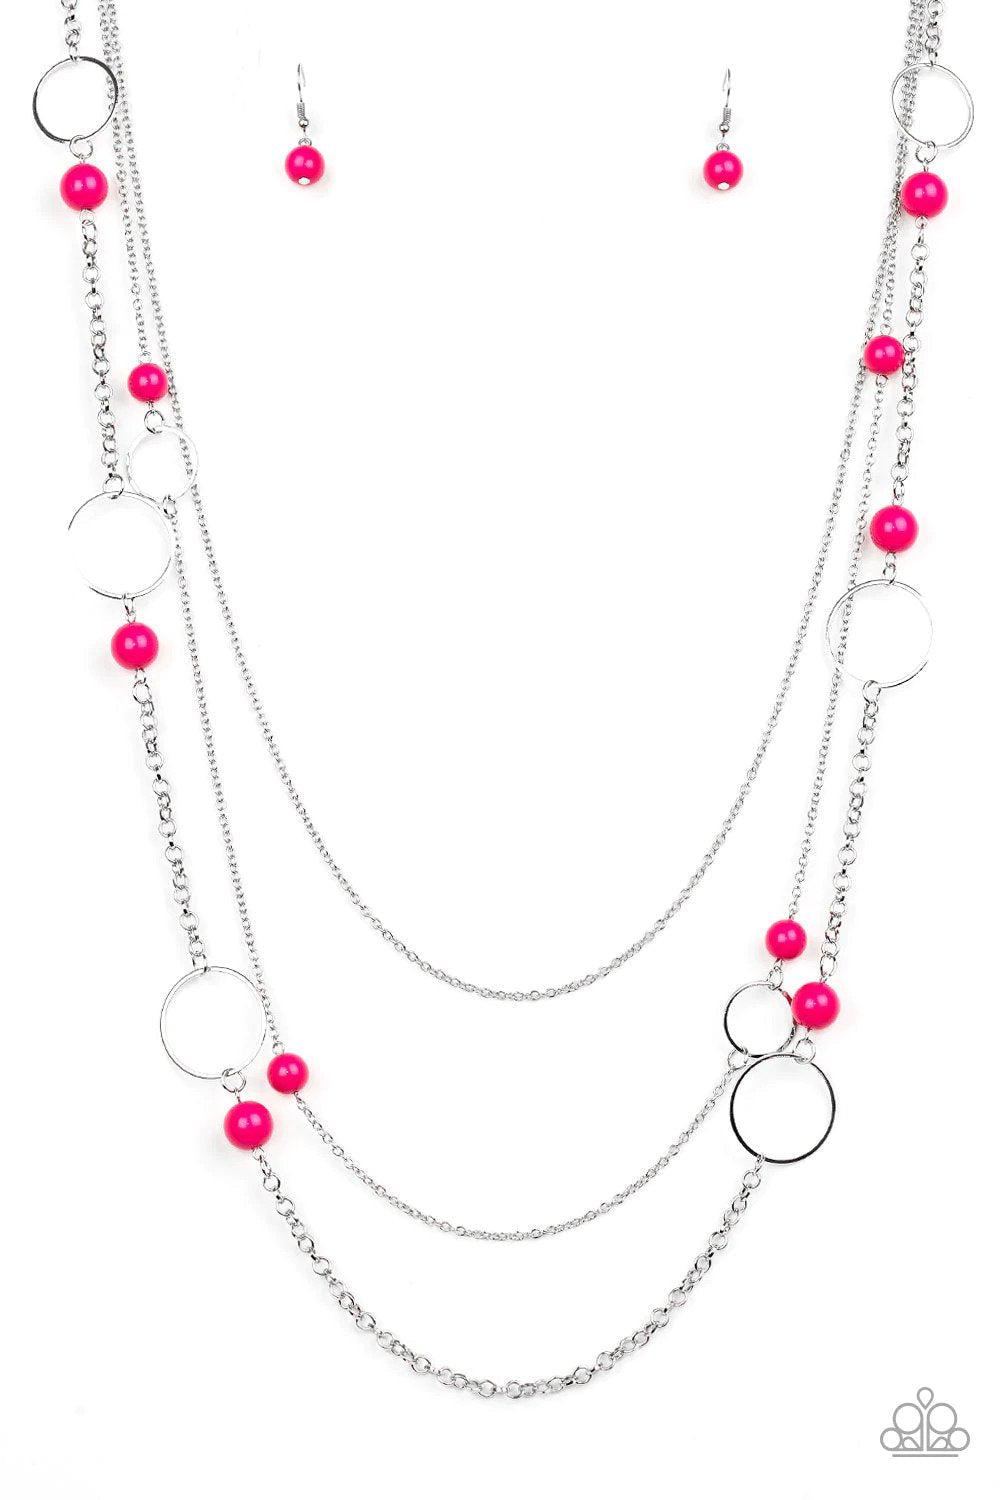 Beachside Babe Pink Necklace - Paparazzi Accessories- lightbox - CarasShop.com - $5 Jewelry by Cara Jewels